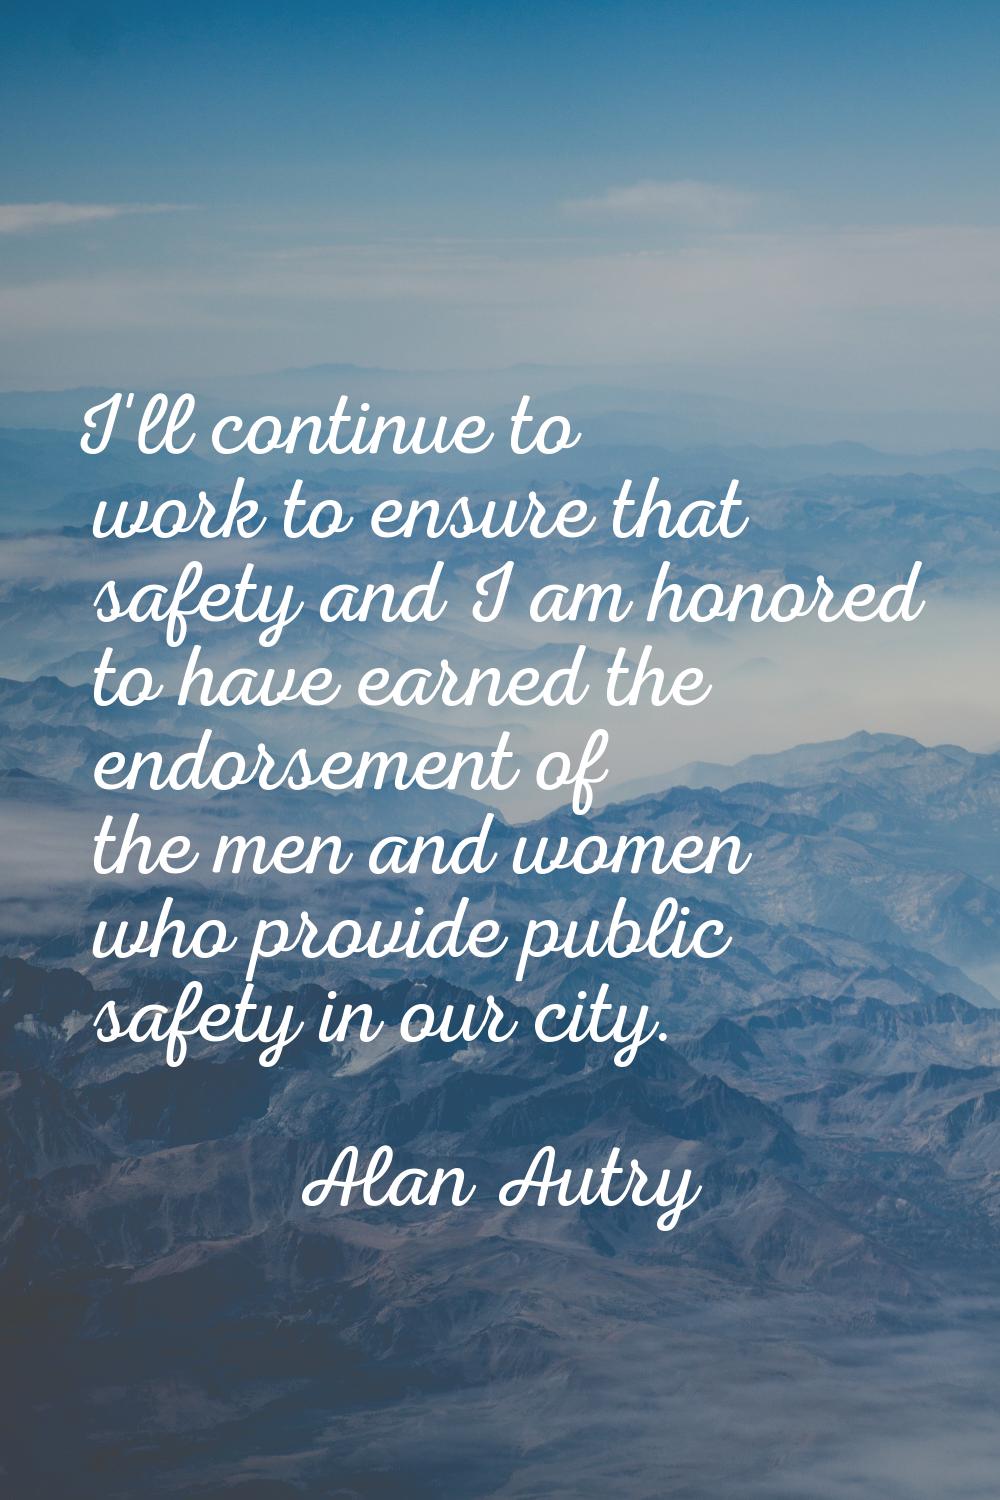 I'll continue to work to ensure that safety and I am honored to have earned the endorsement of the 